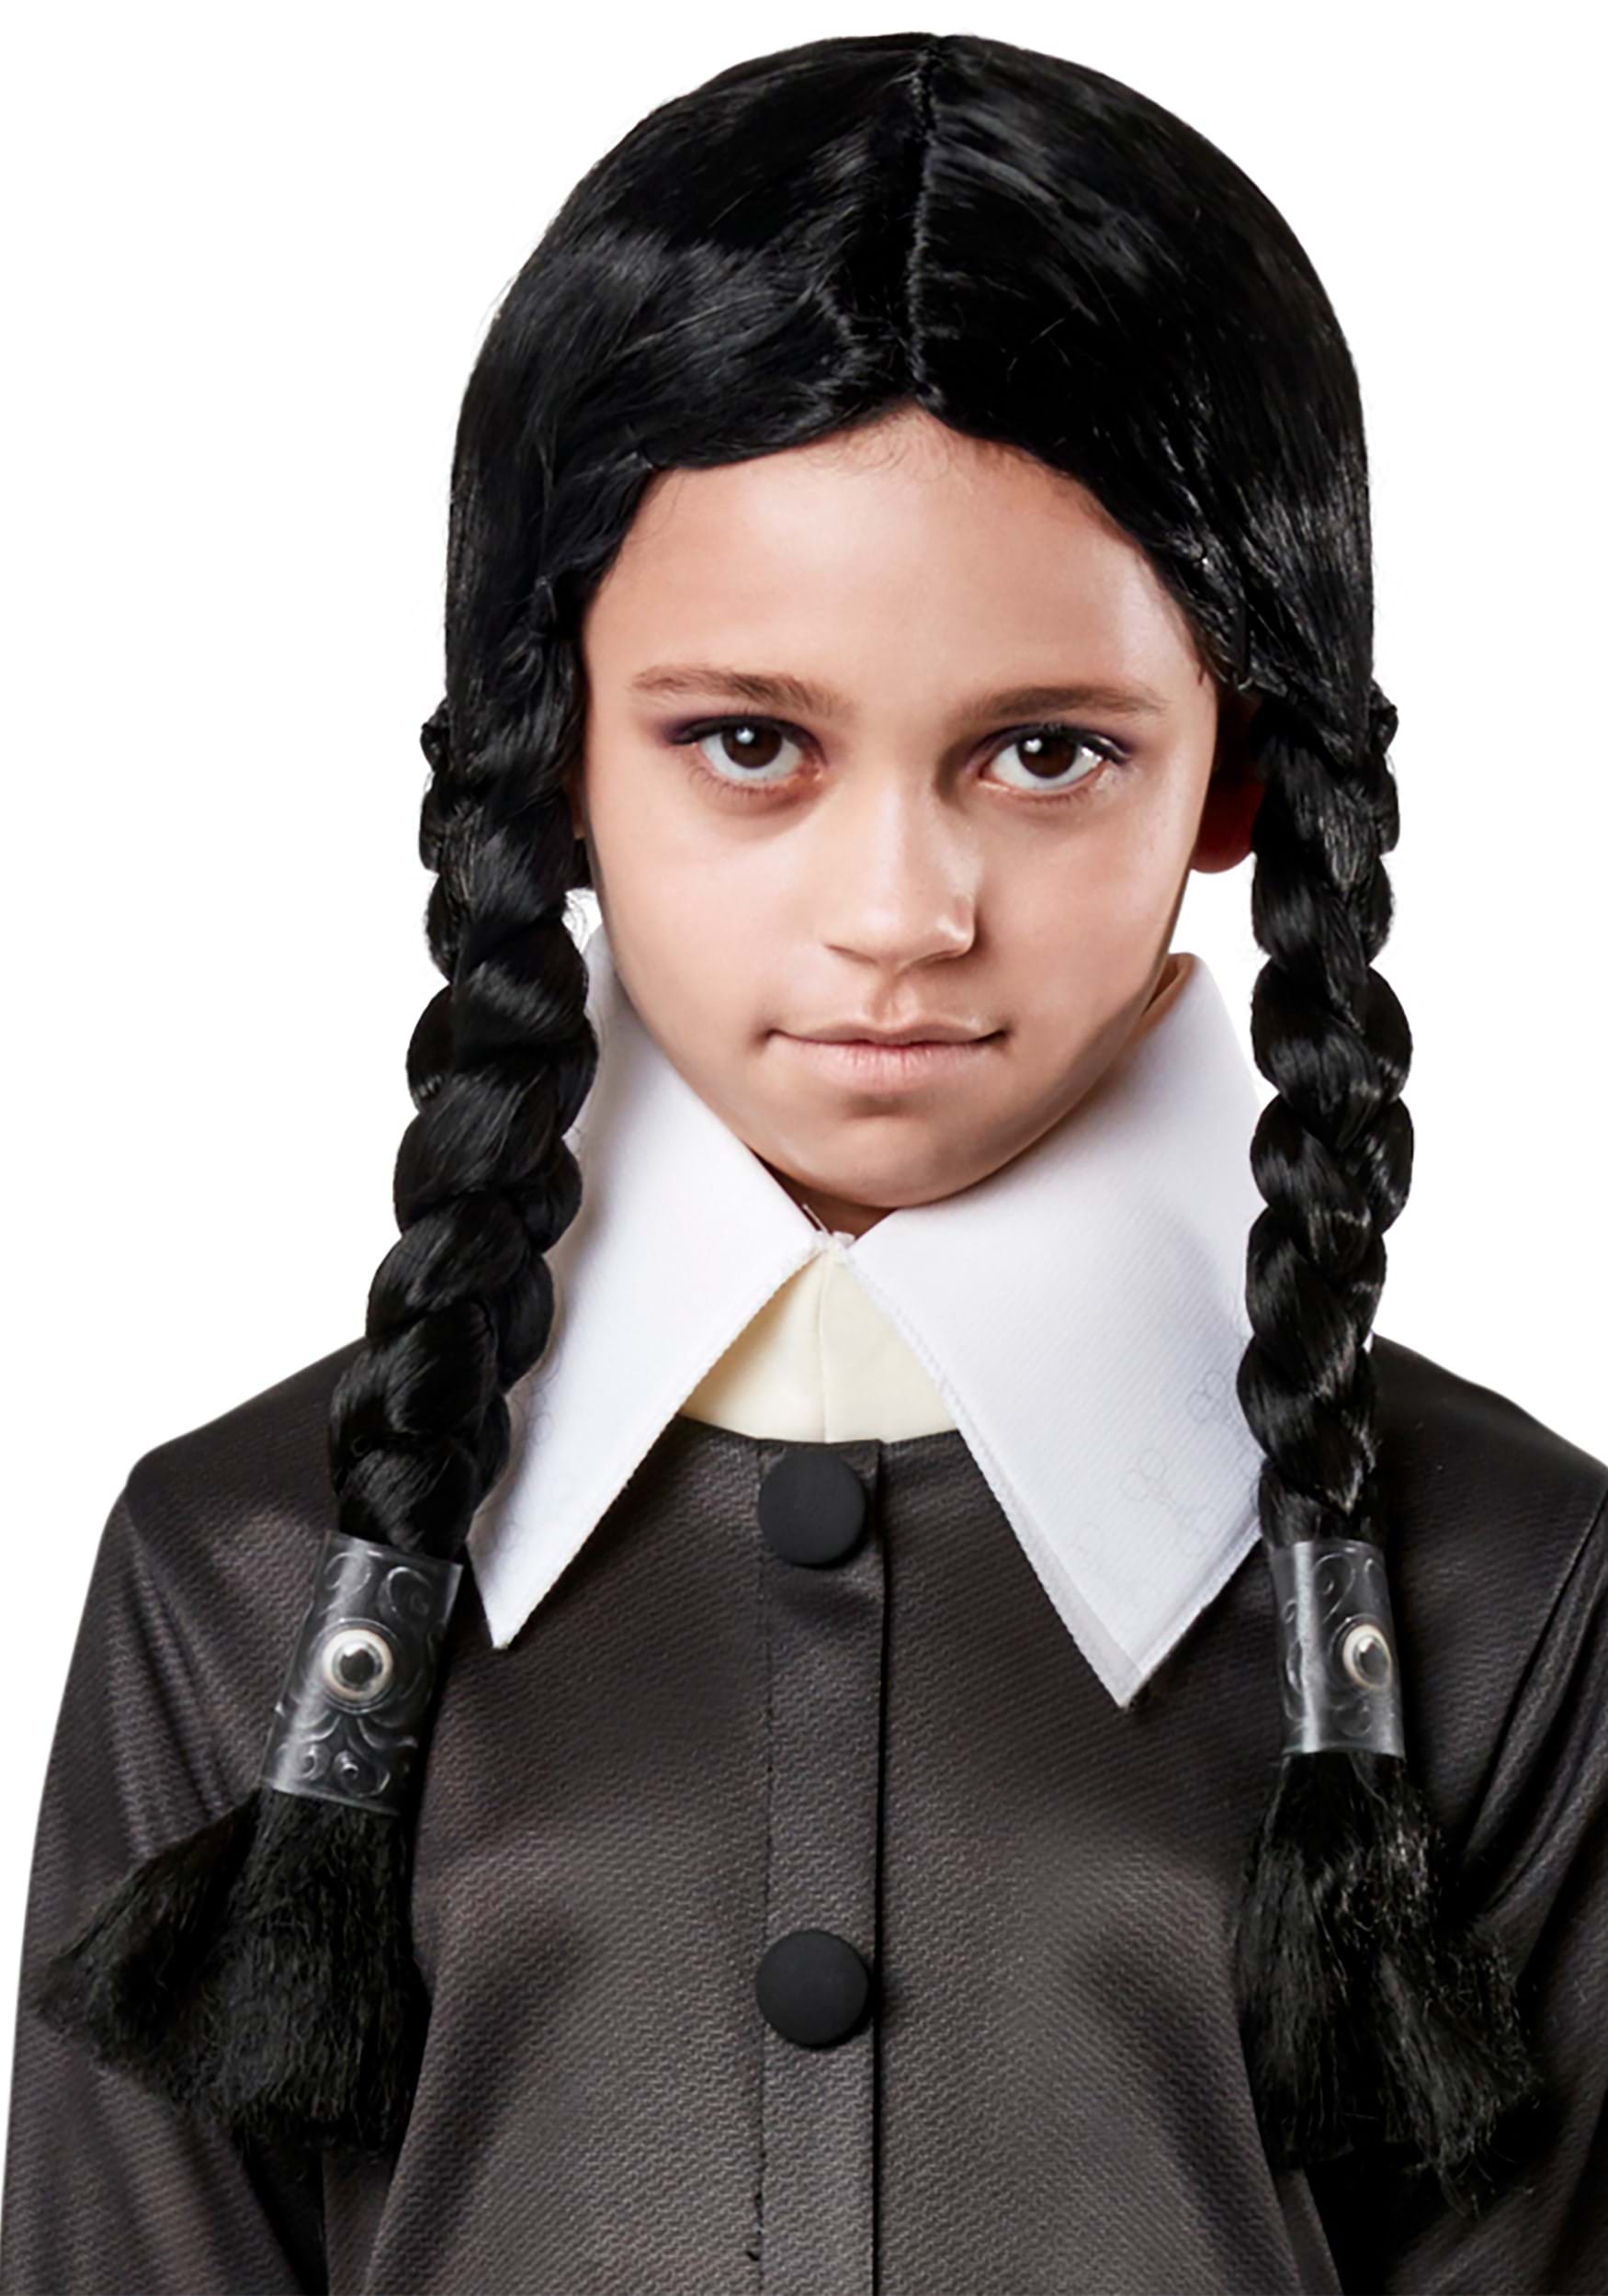 The Adams Family 2 Wednesday Kid's Wig with Braids